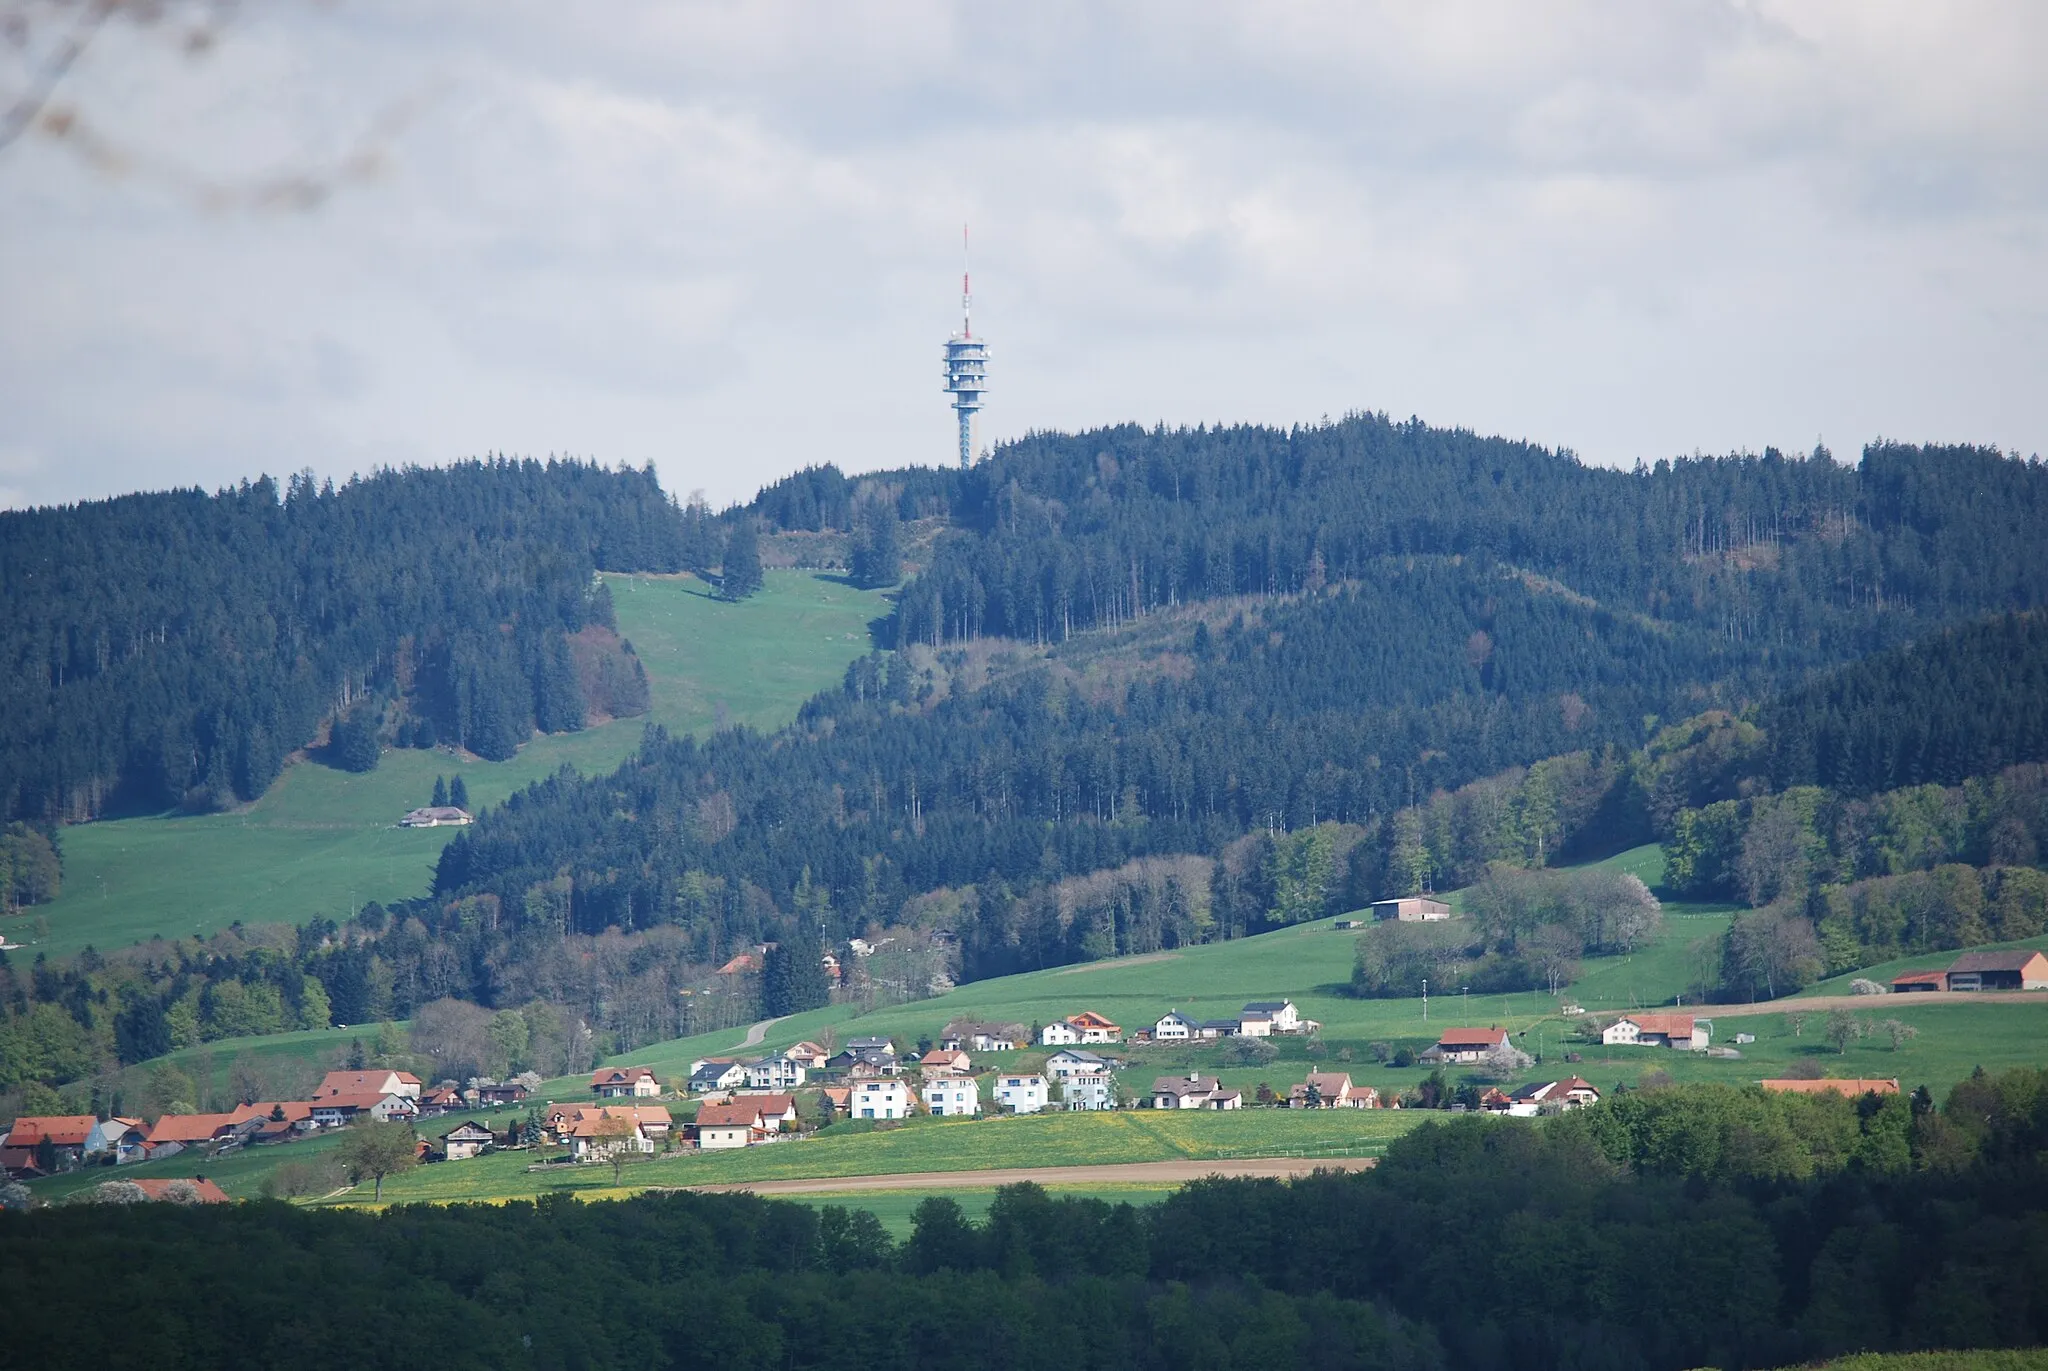 Photo showing: Mount Gibloux seen from Villaz-Saint-Pierre, canton of Fribourg, Switzerland - Mount Gibloux with the Swisscom tower in the back